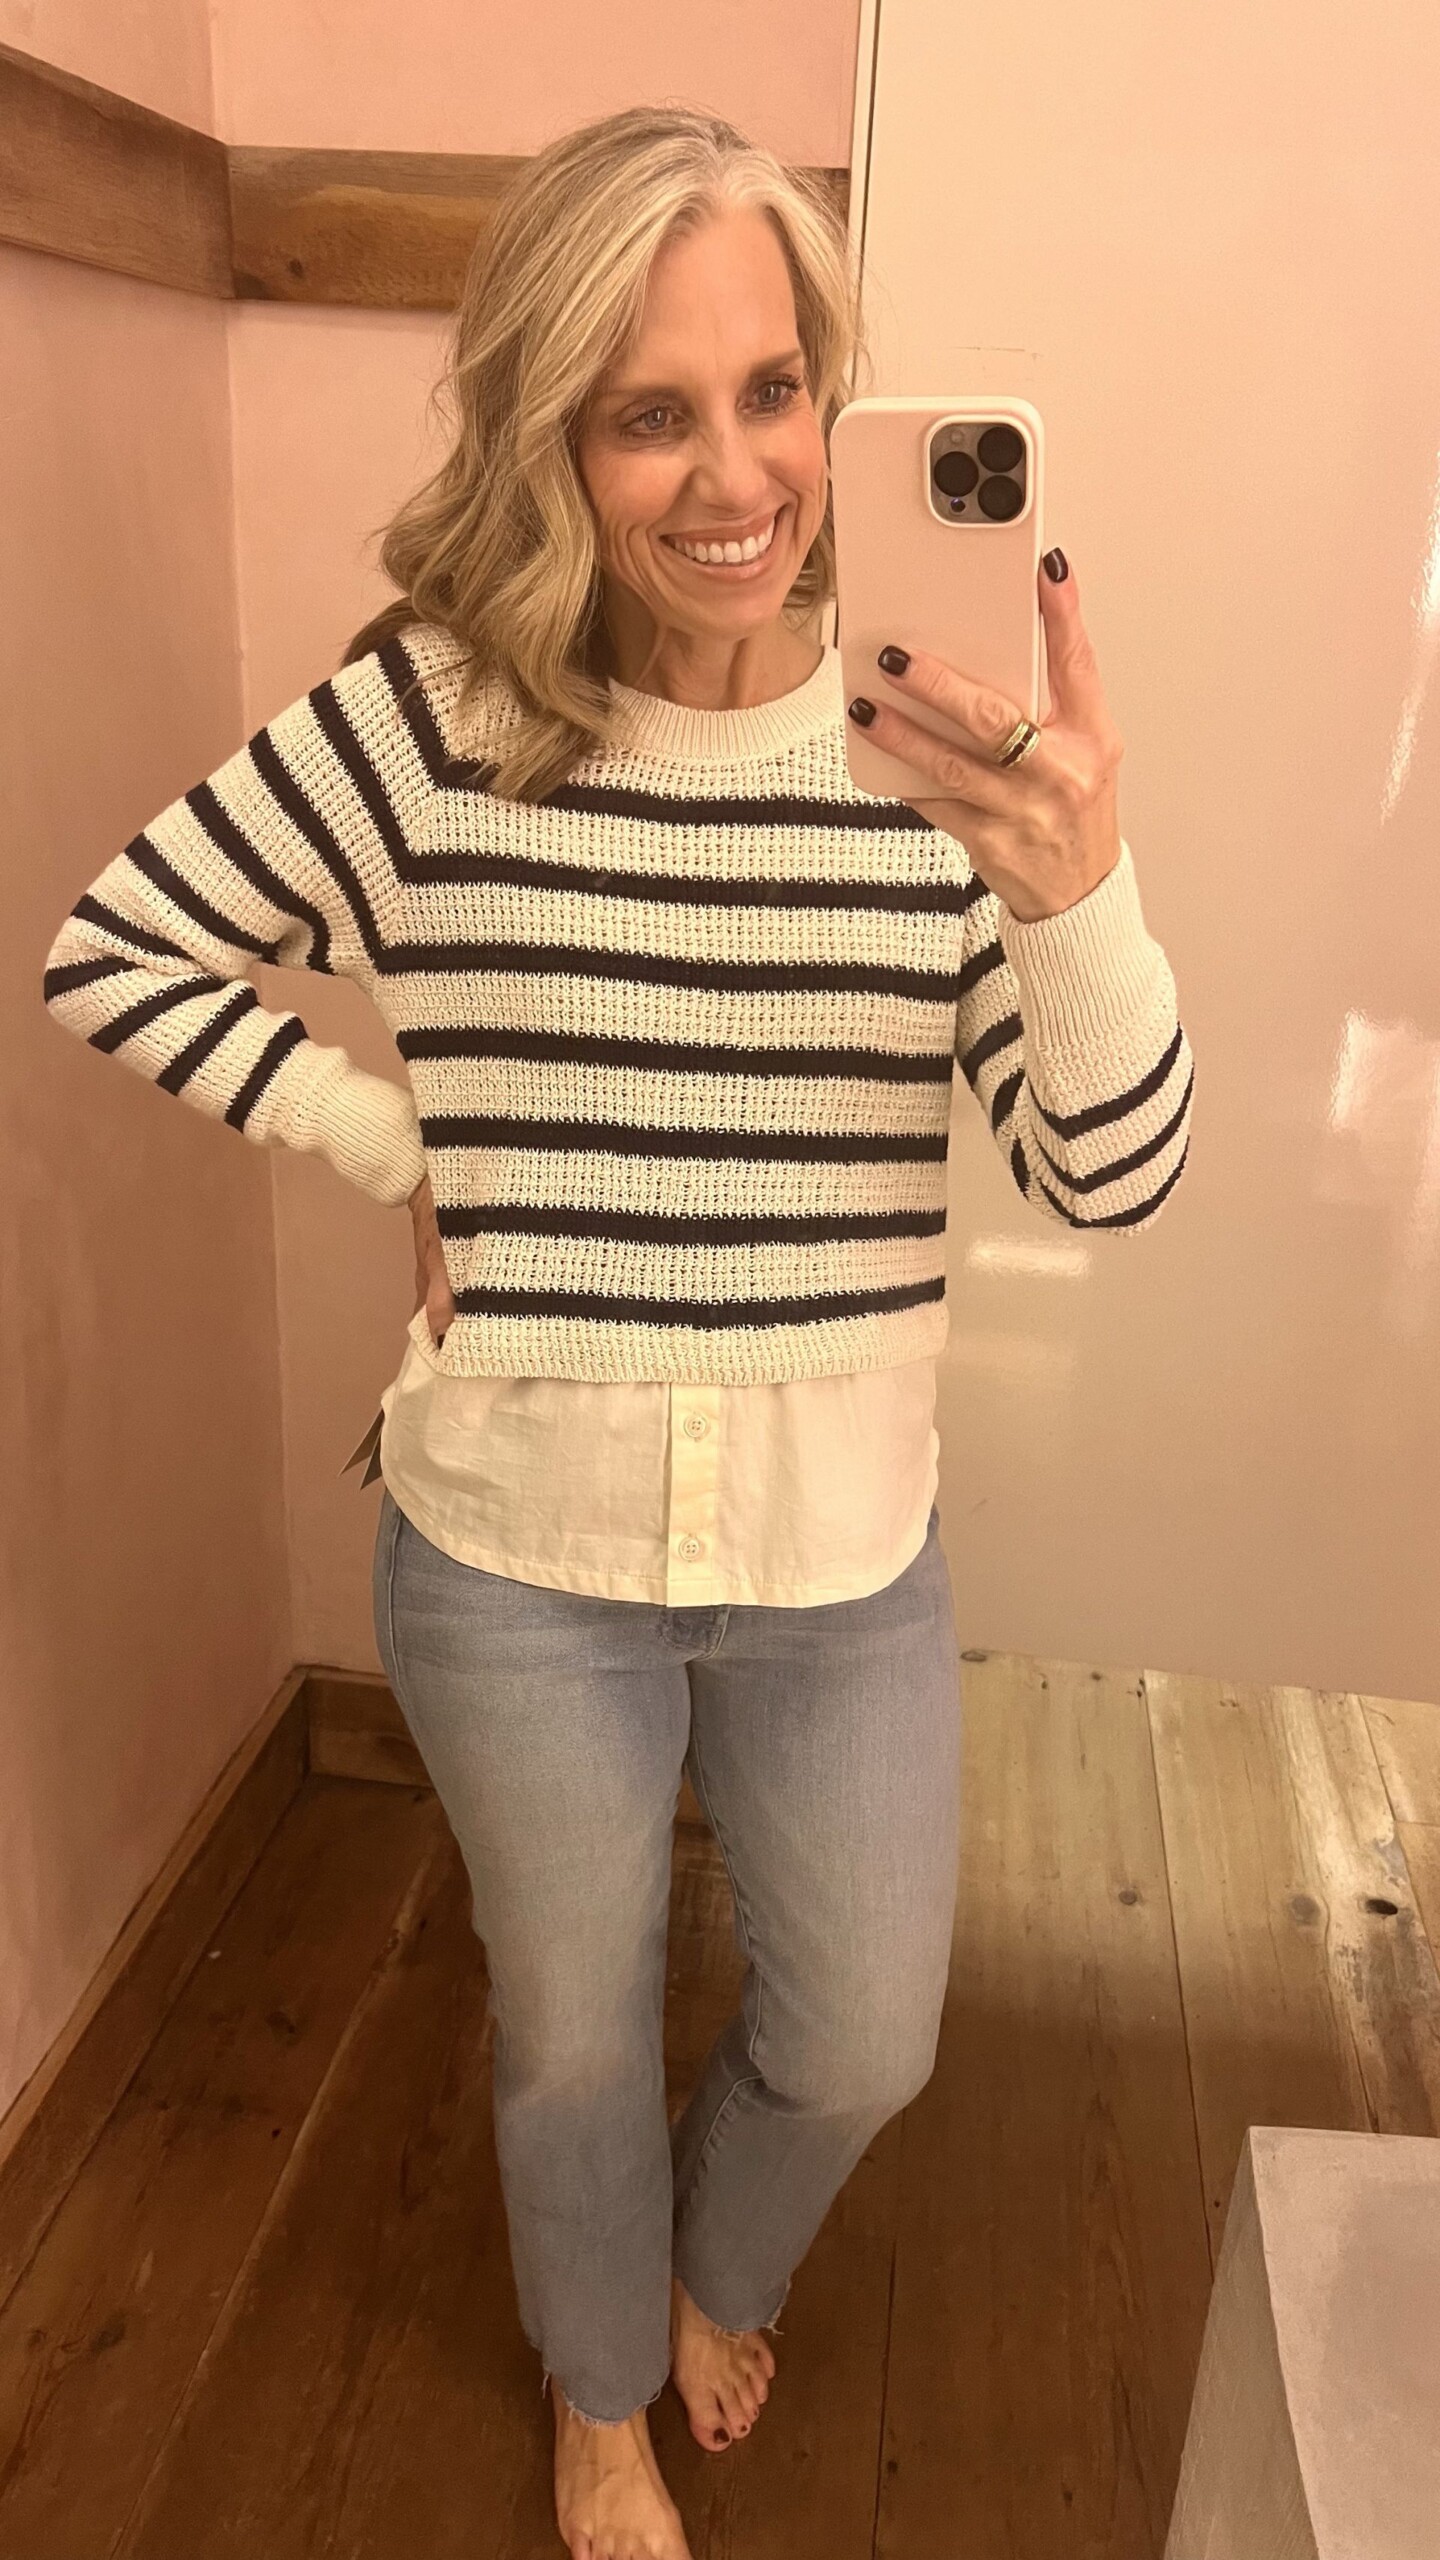 Anthropologie try on
Mother Jeans 